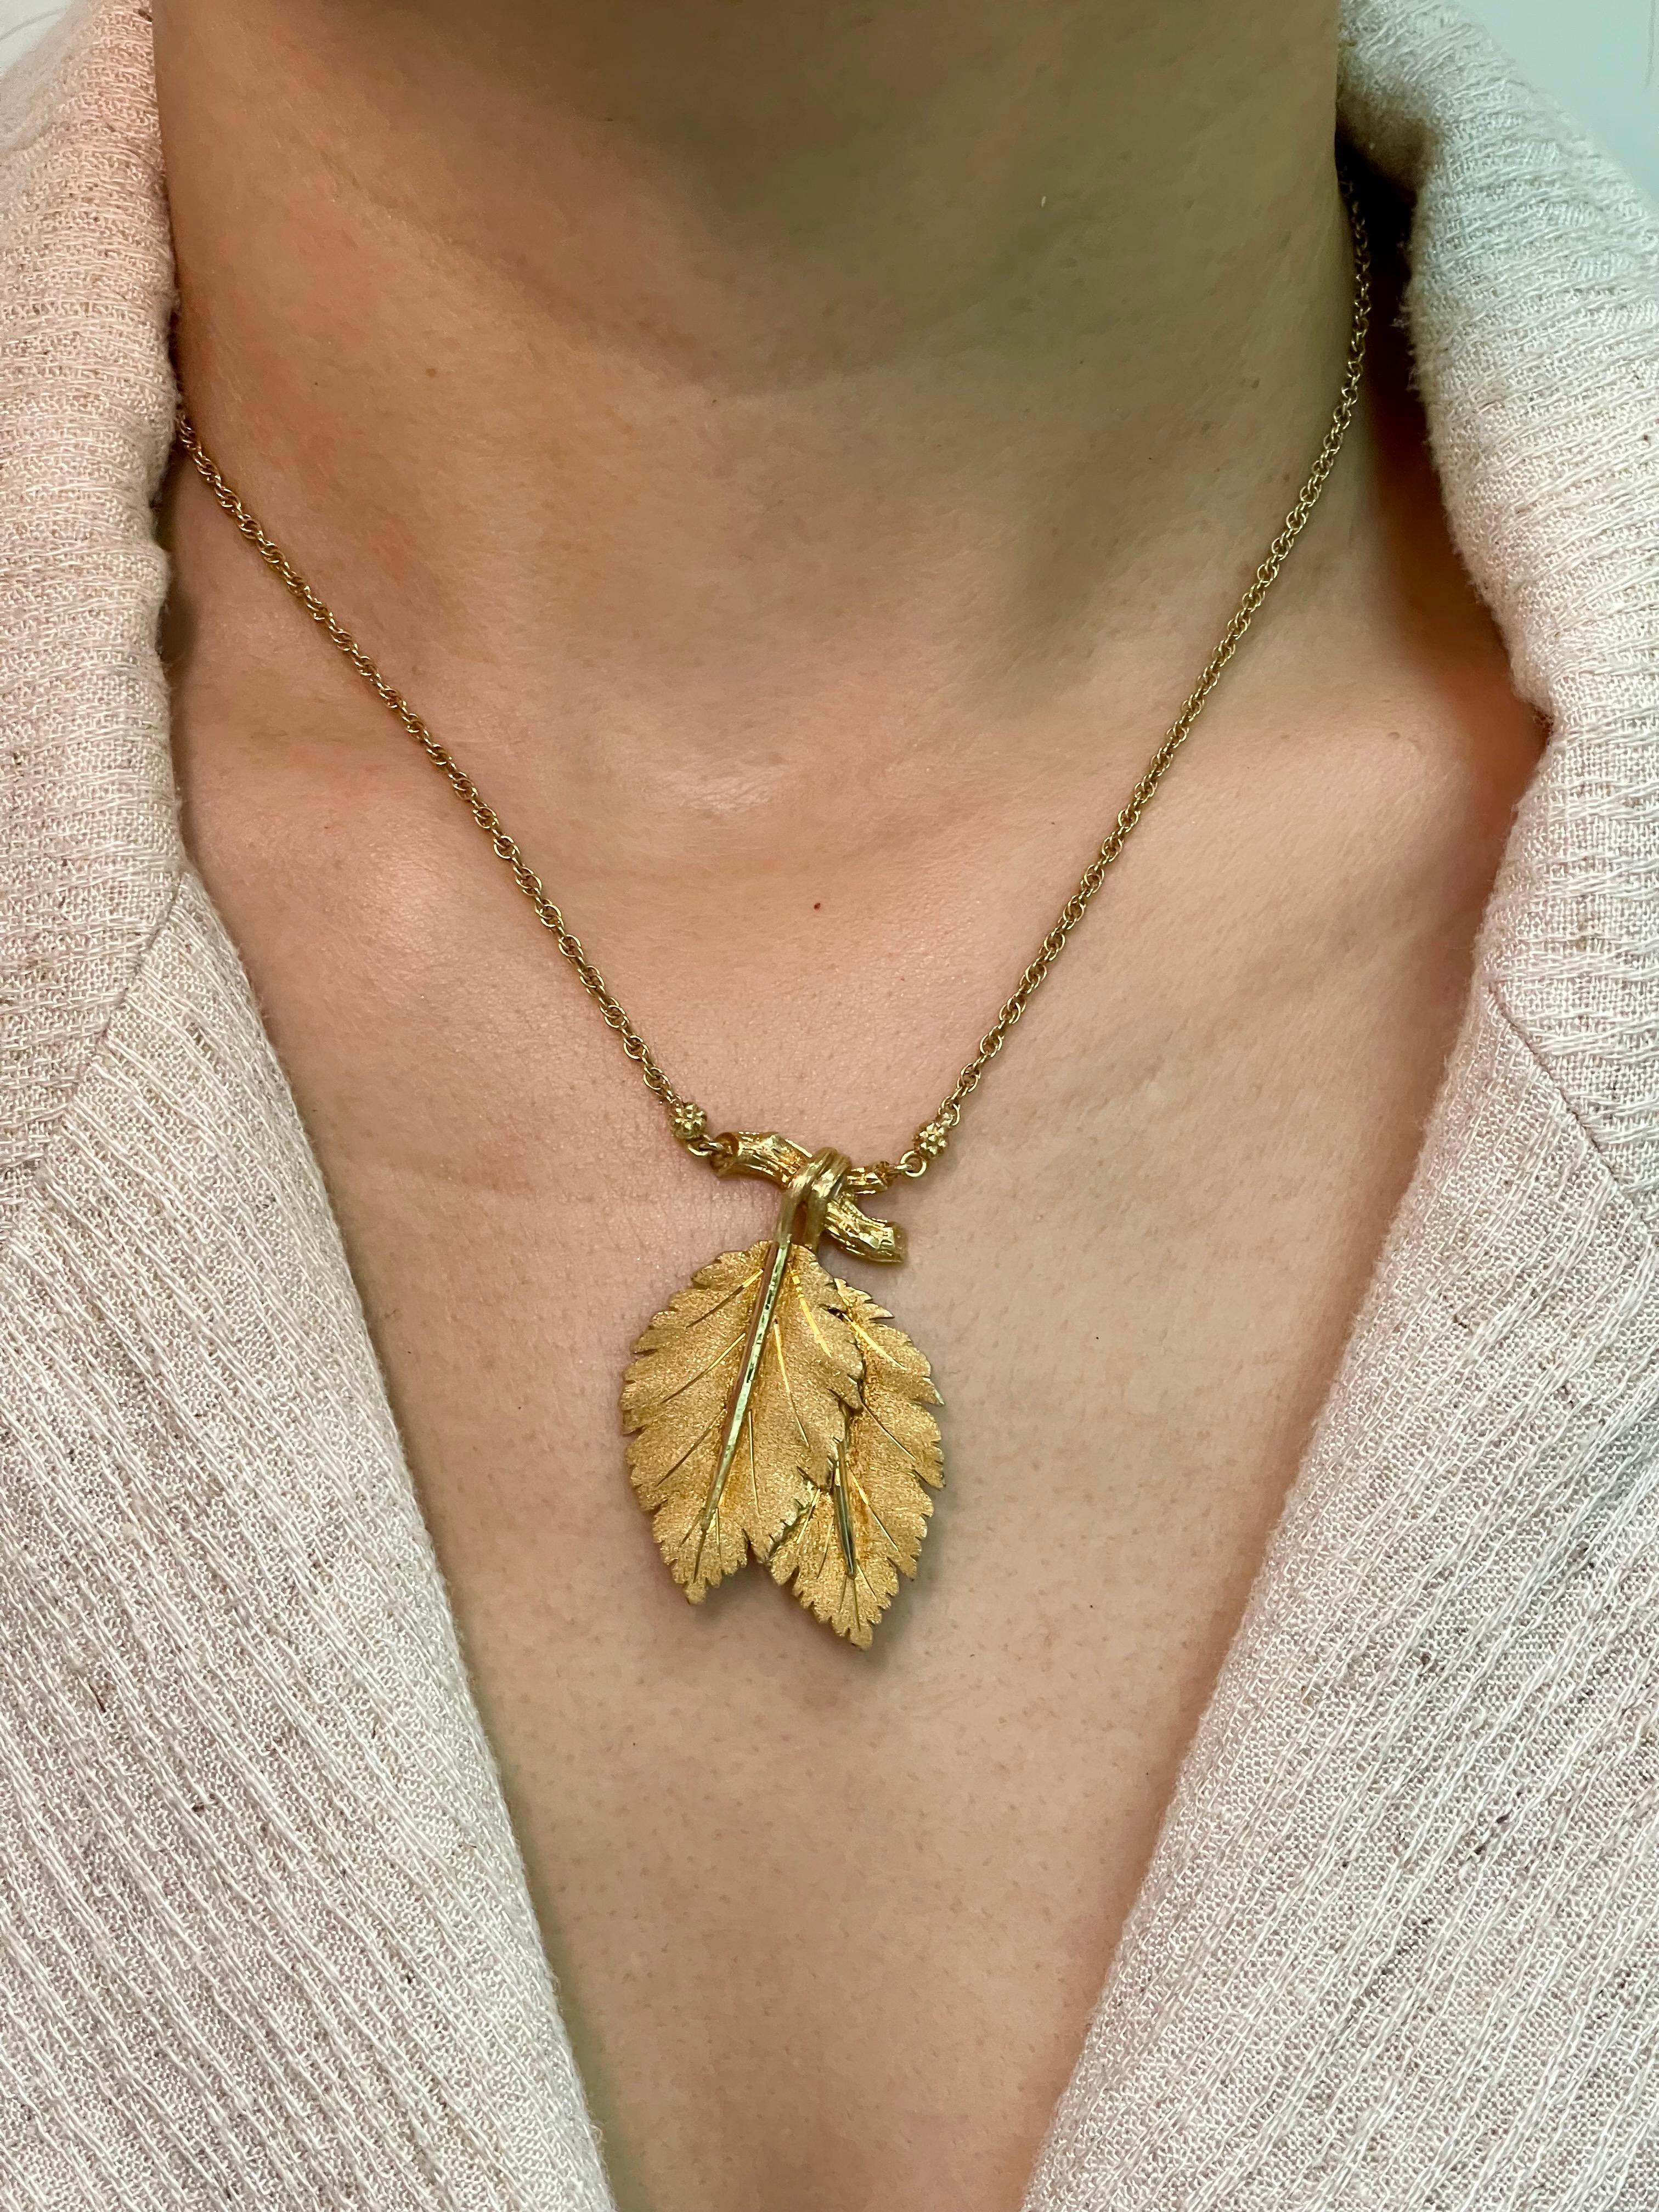 Here is a unique pendant that you don't see everyday by the famous jeweler Federico Buccellati! The iconic leaves and twigs design is superbly realistic. The details are incredible. The polished and brush finish contrast is amazing. The pendant